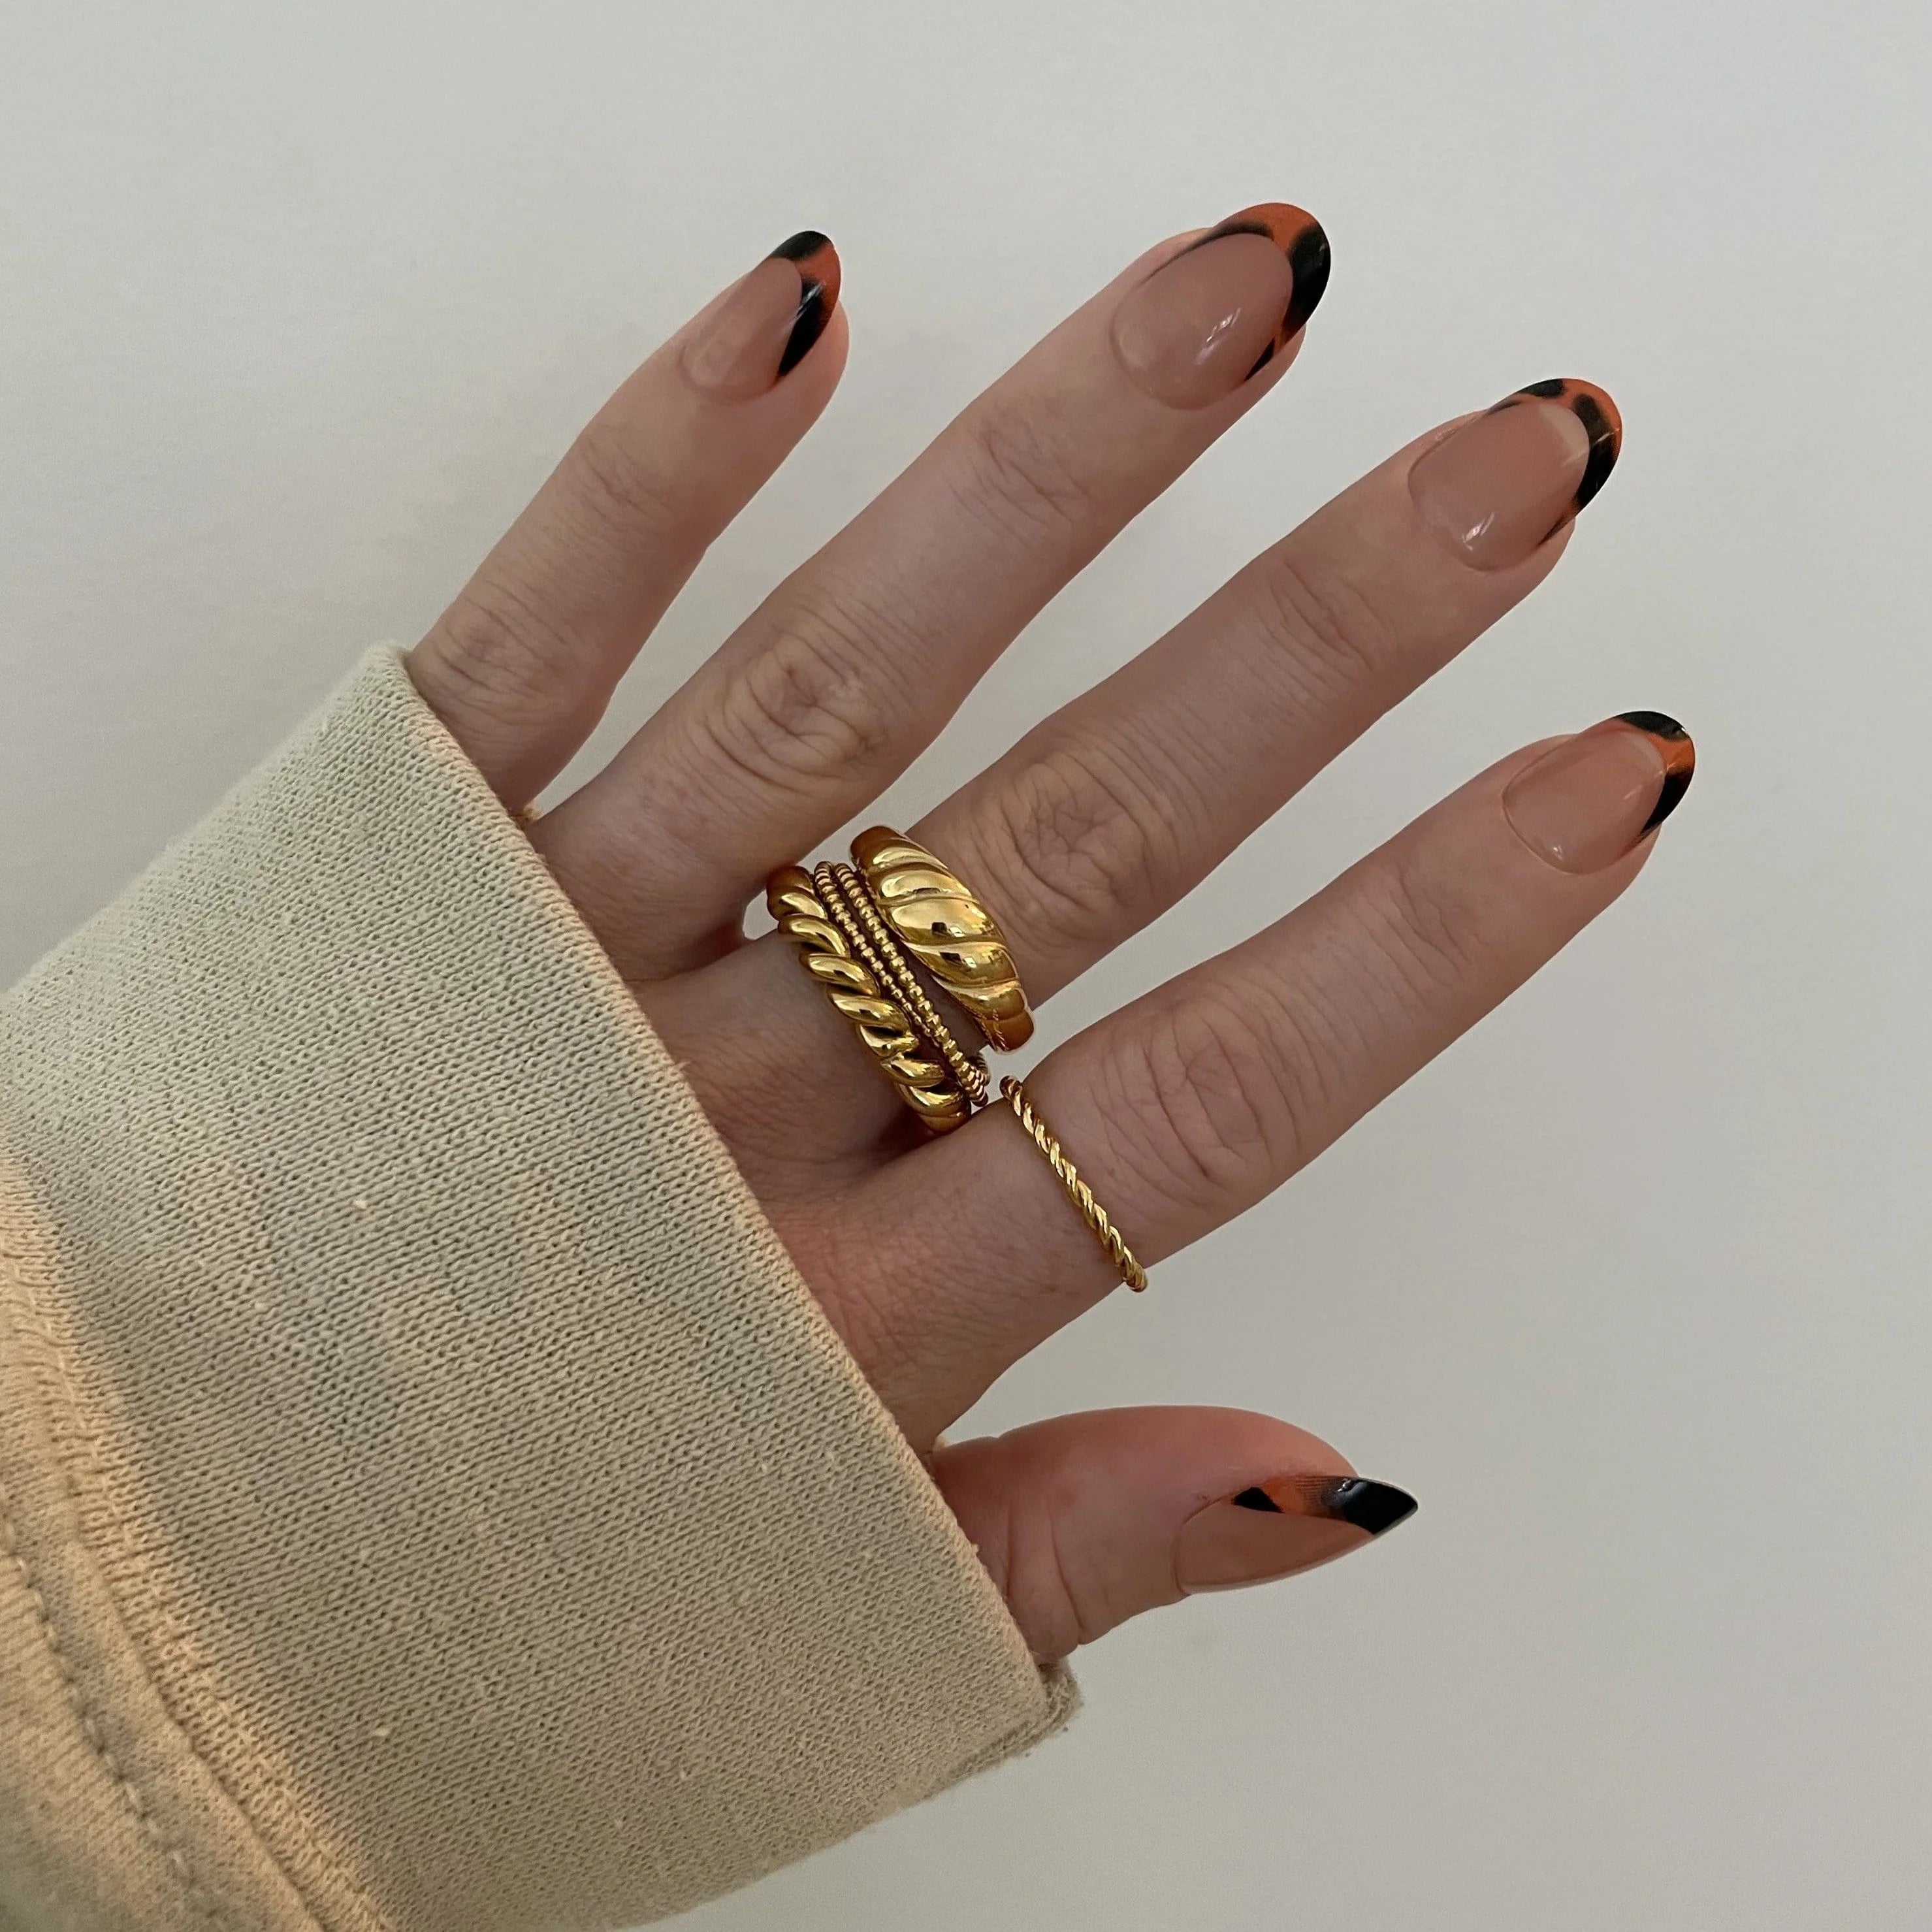 Raven Twisted Croissant Ring - Lucette Collection